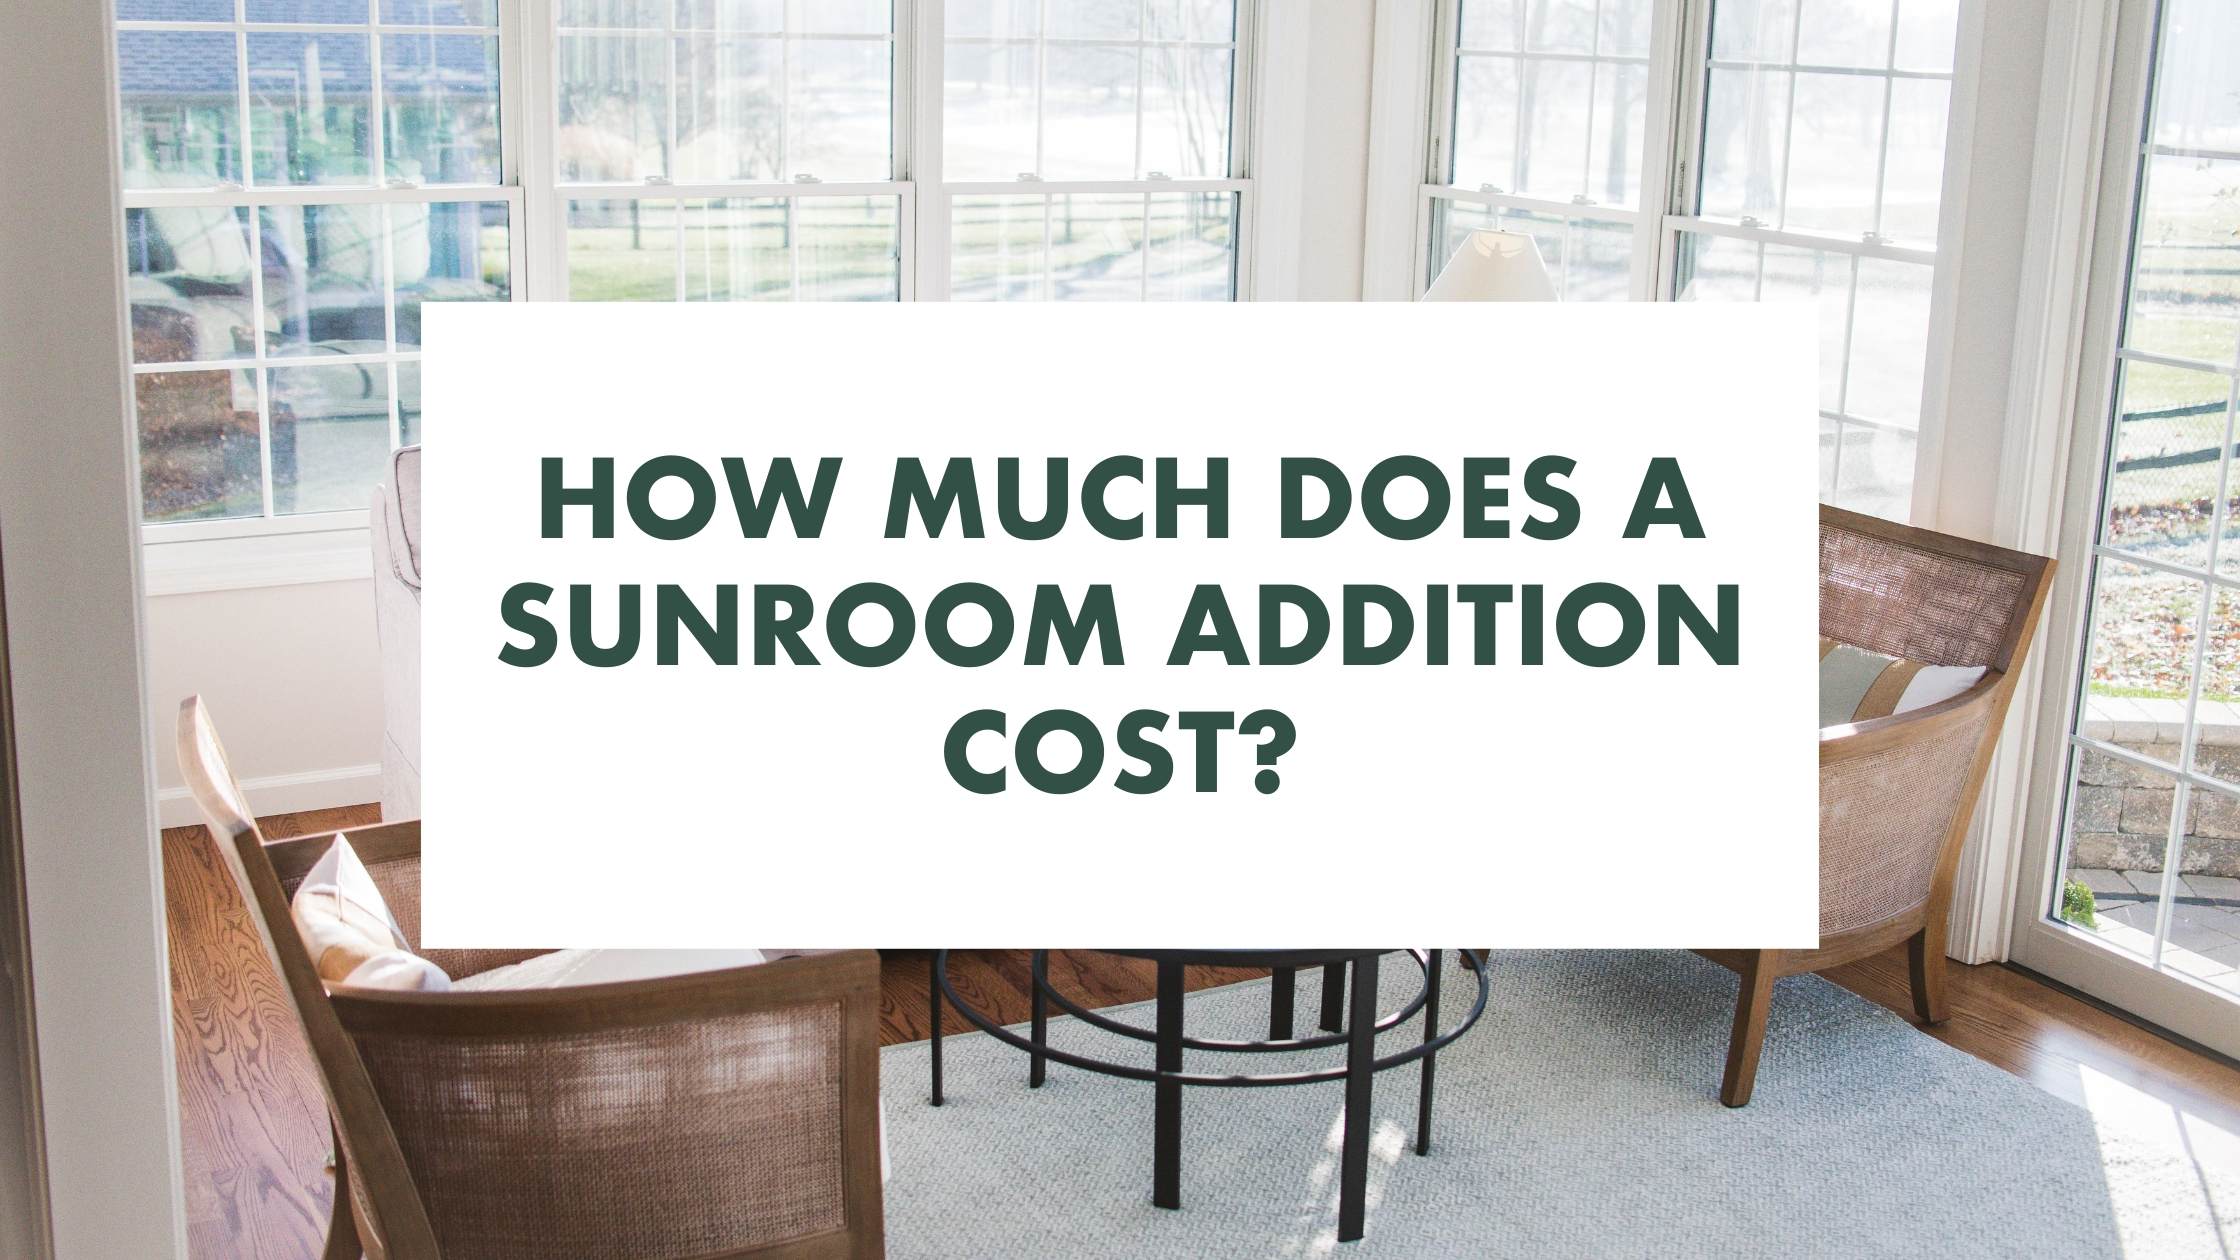 How Much Does a Sunroom Addition Cost?